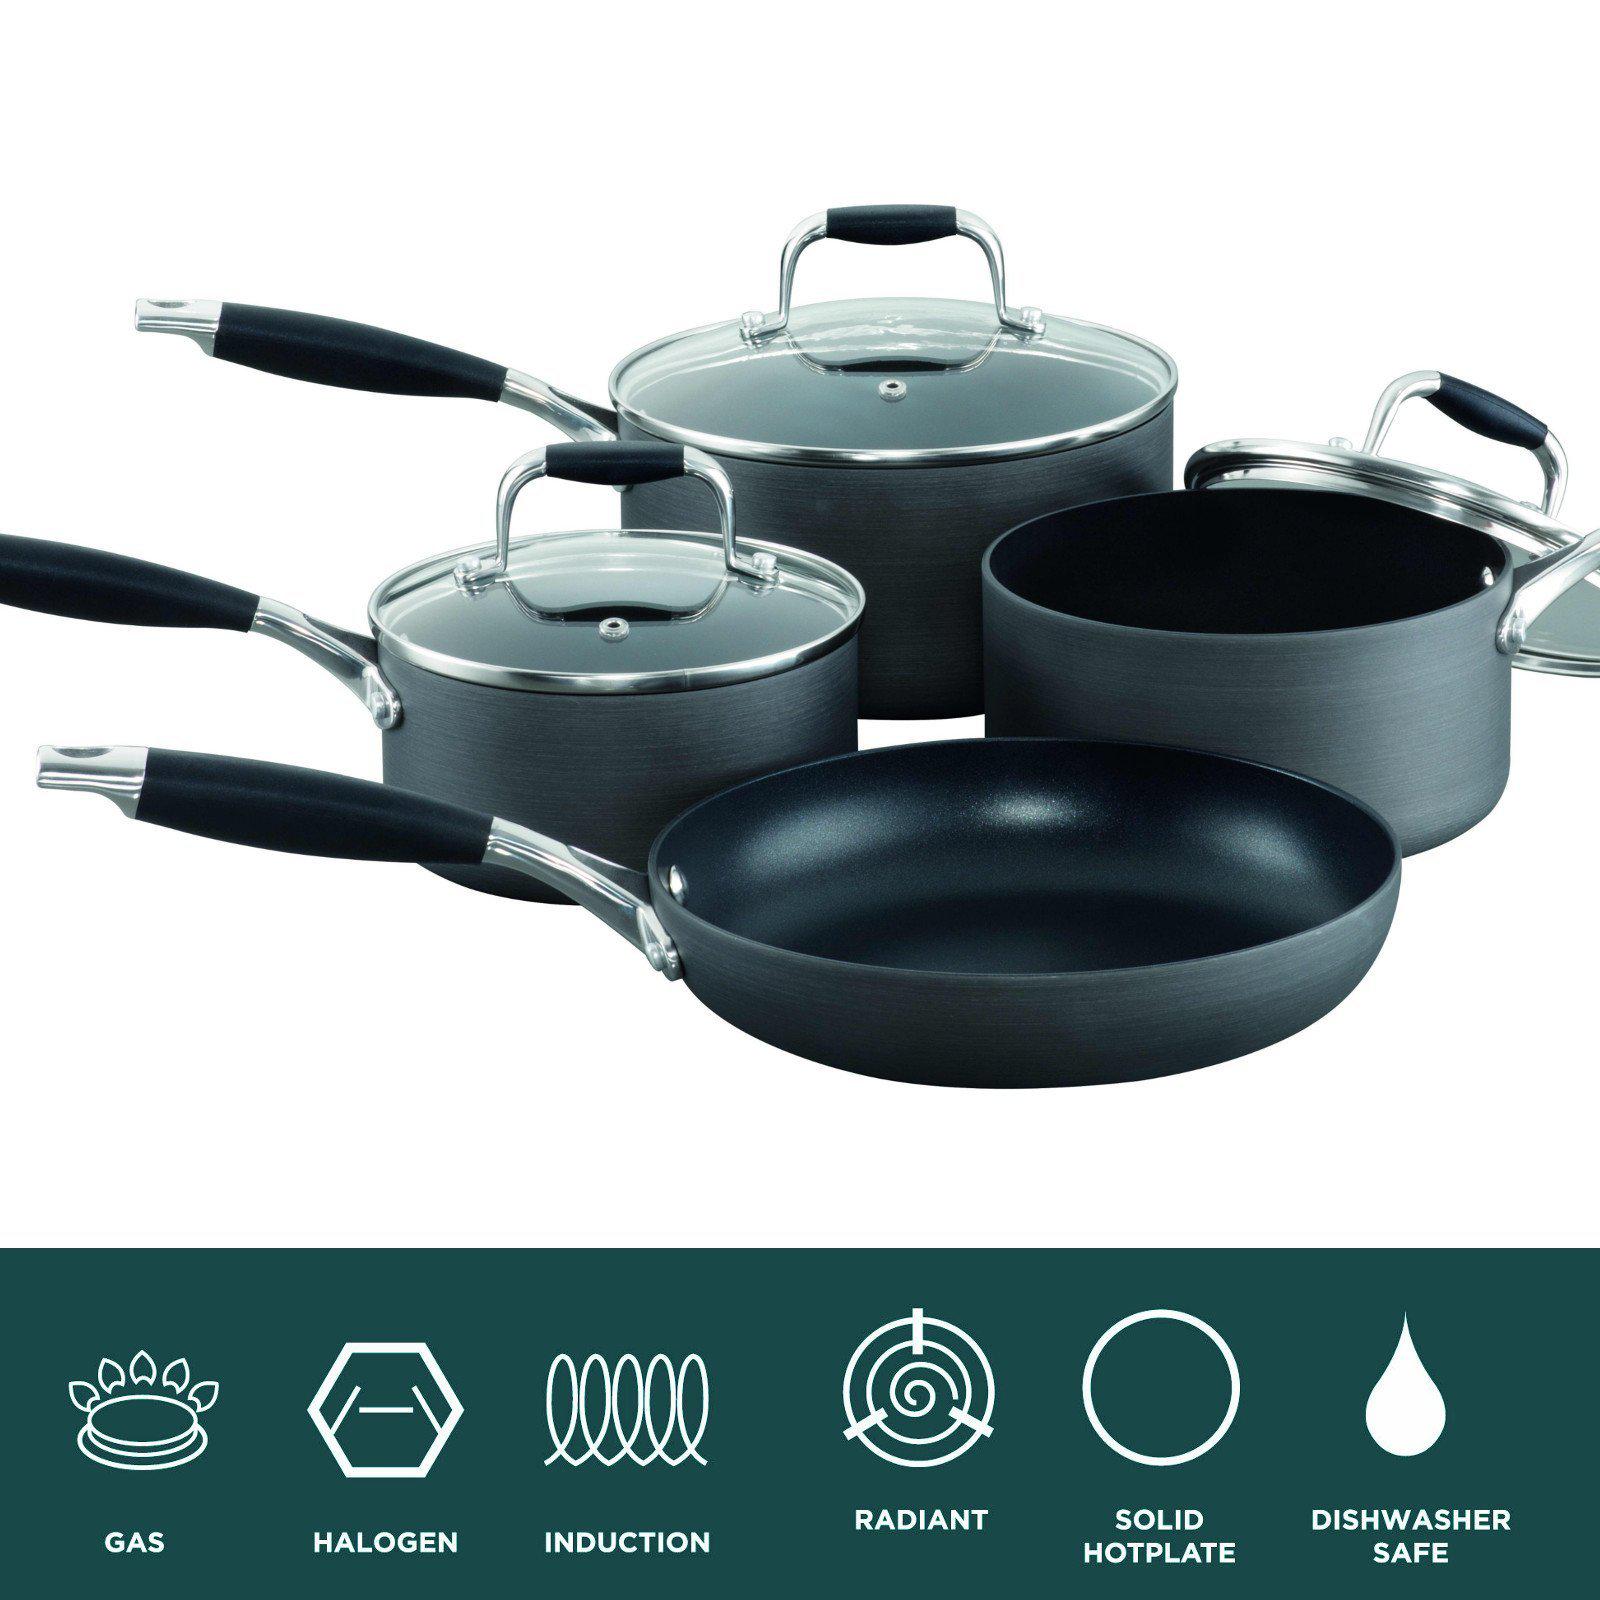 Blinq Elite 4pcs Hard Anodised Cookware Set with Glass Lids-Cookware Set-Chef's Quality Cookware